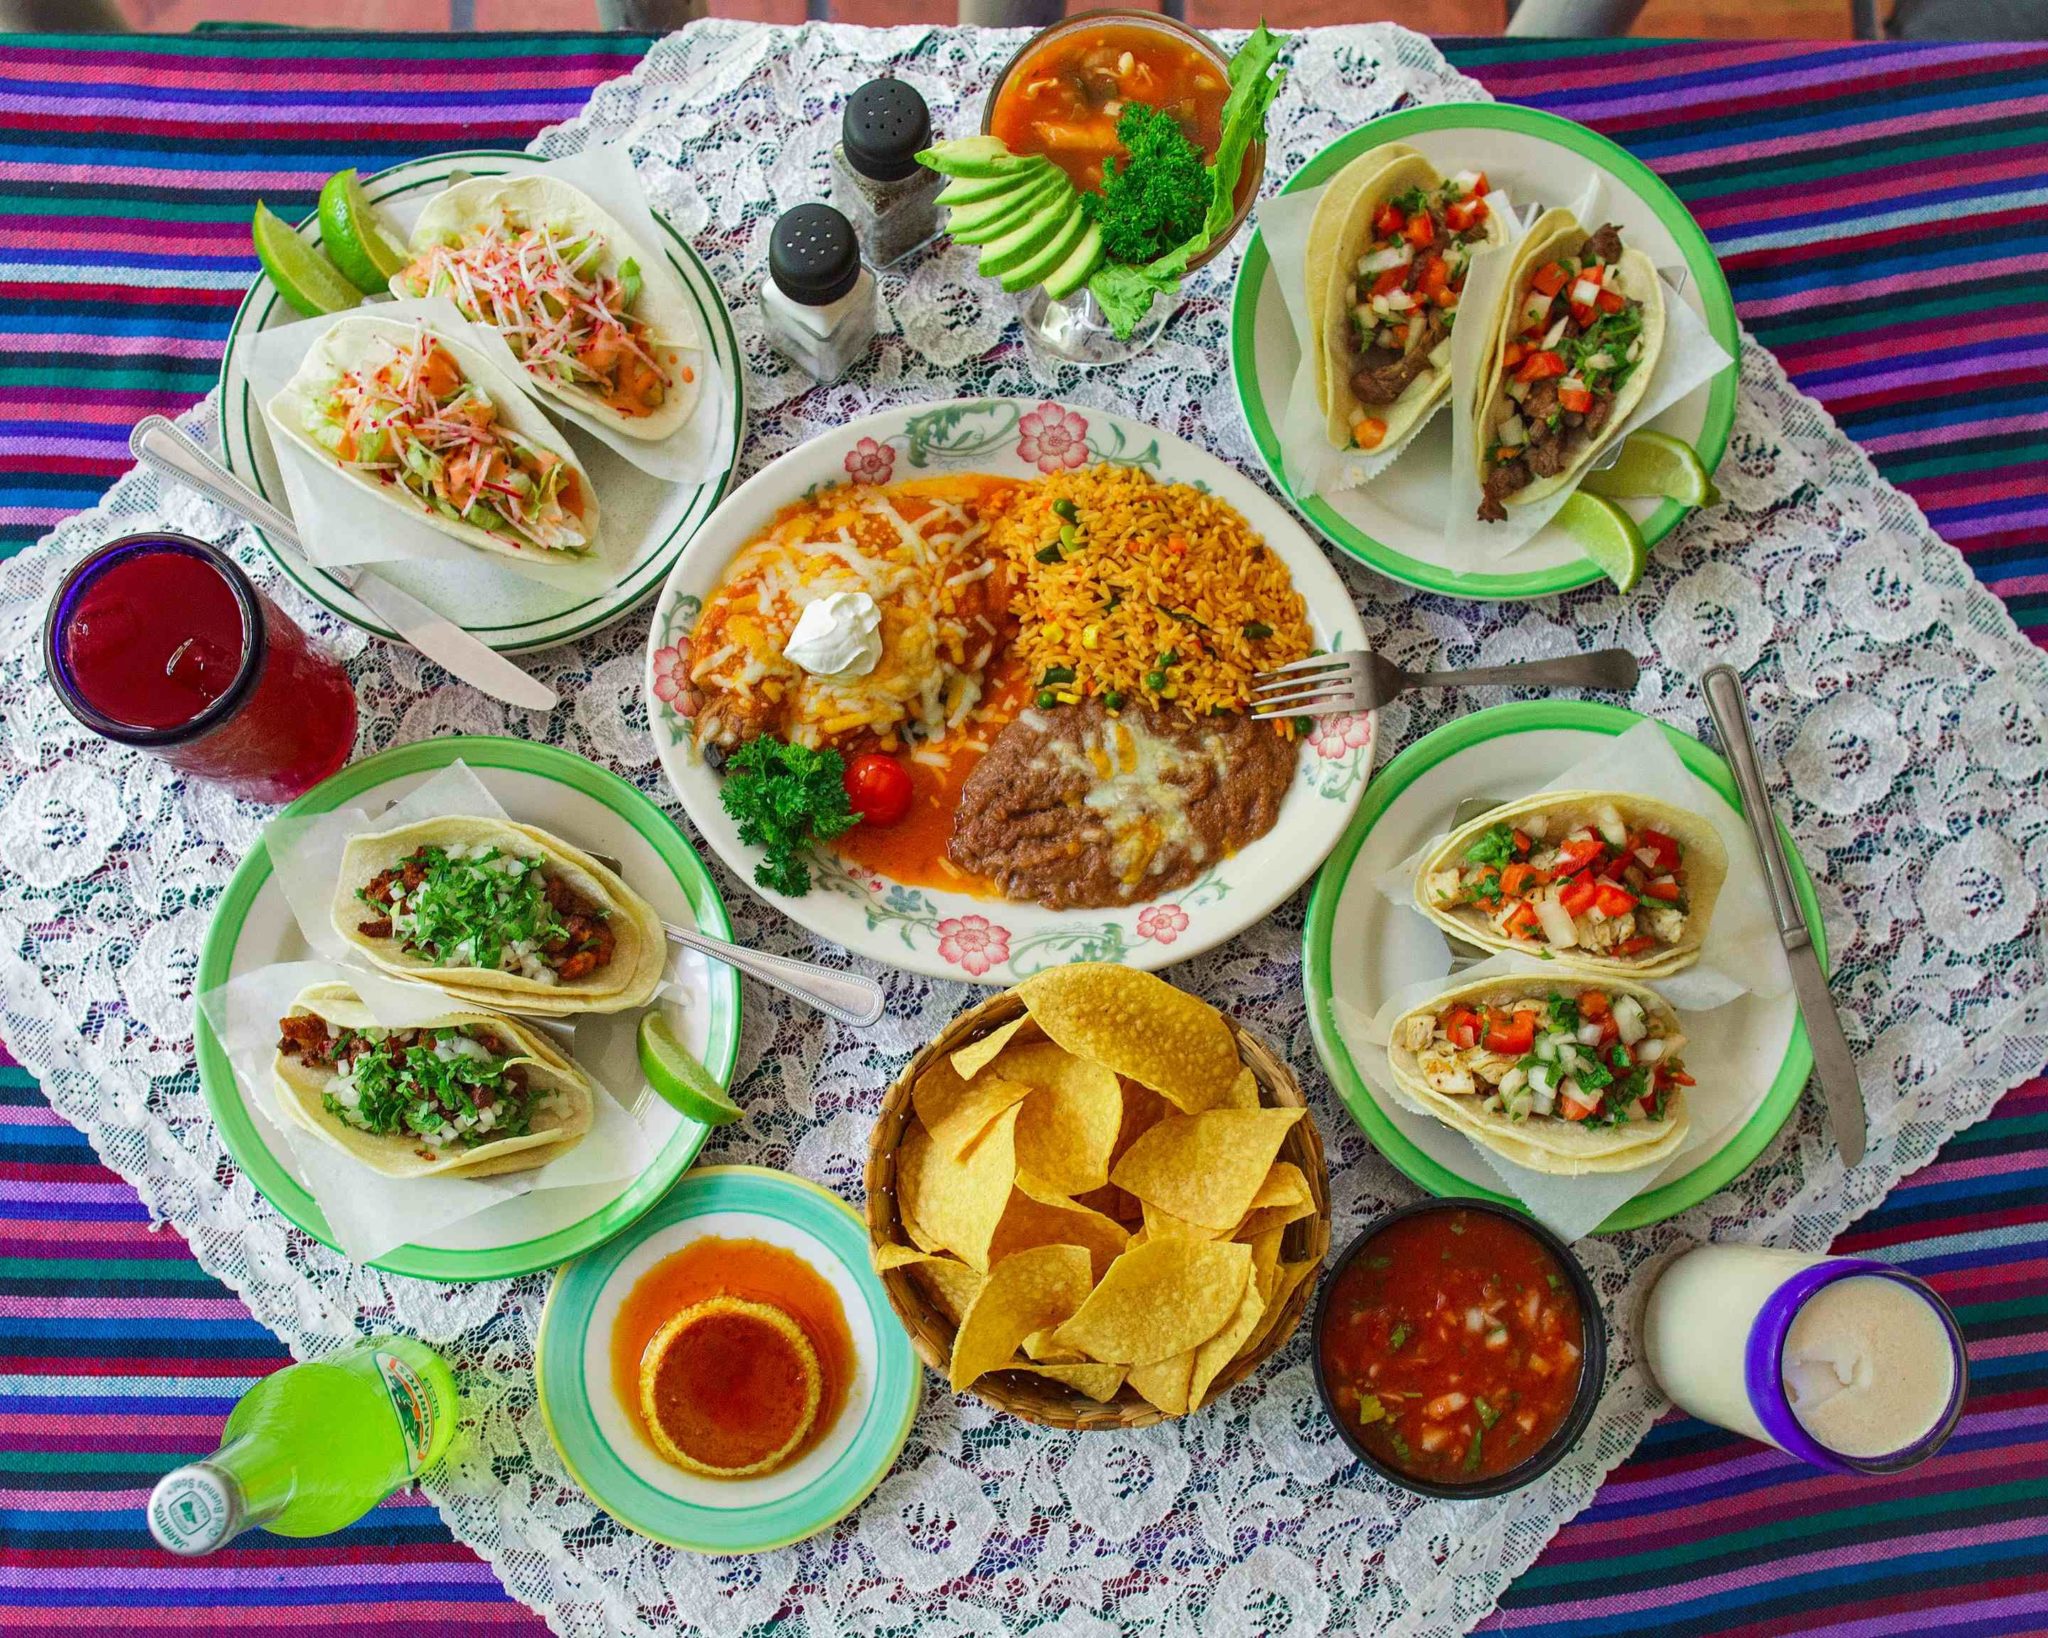 Where to Find Mexican Food in North Miami